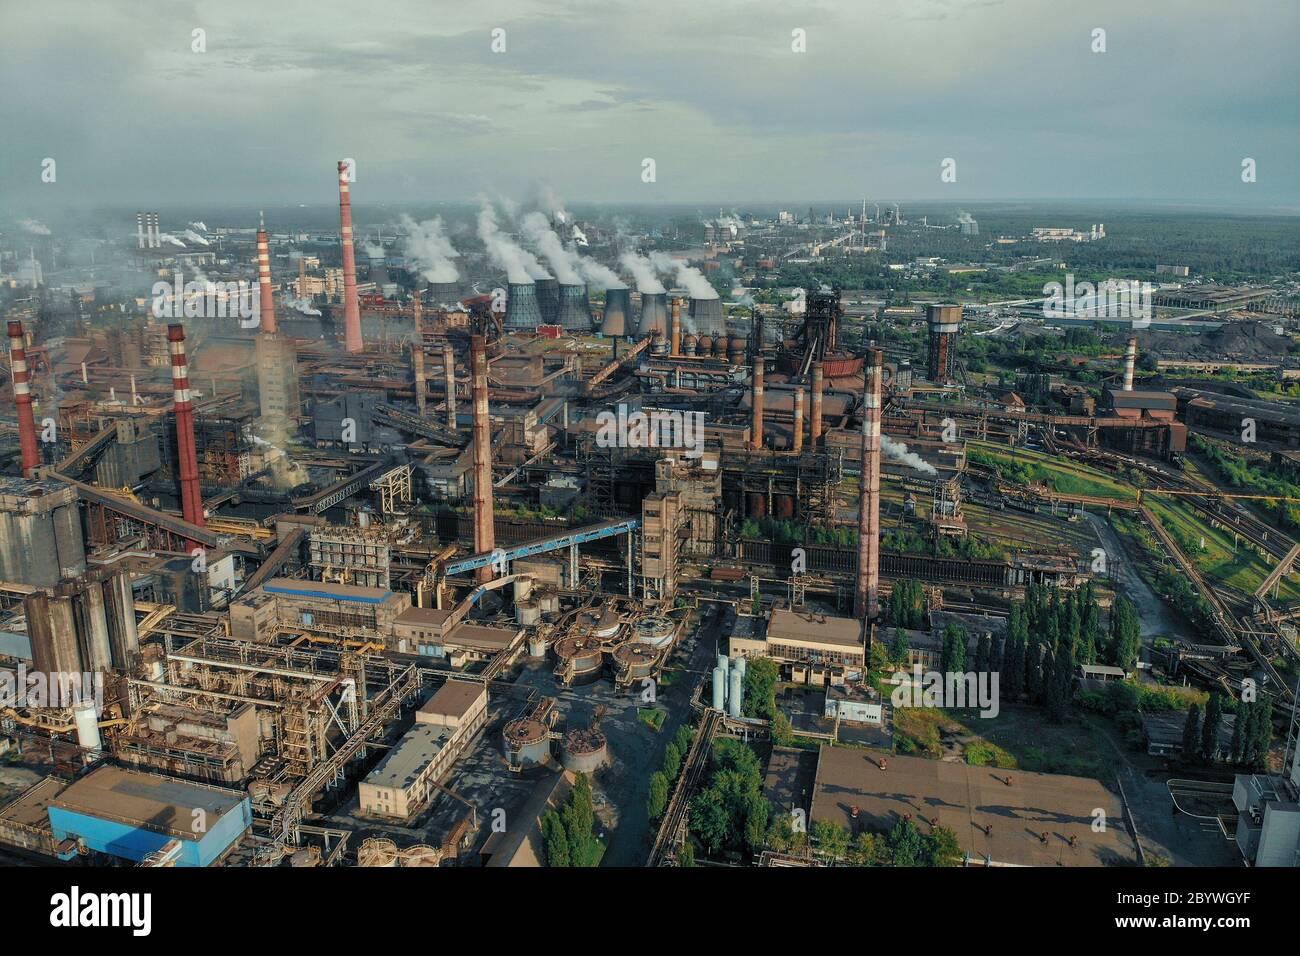 Aerial view of huge Metallurgical Plant, smokestacks and chimneys with smoke. Environmental pollution from petrochemical production industrial factory. Stock Photo